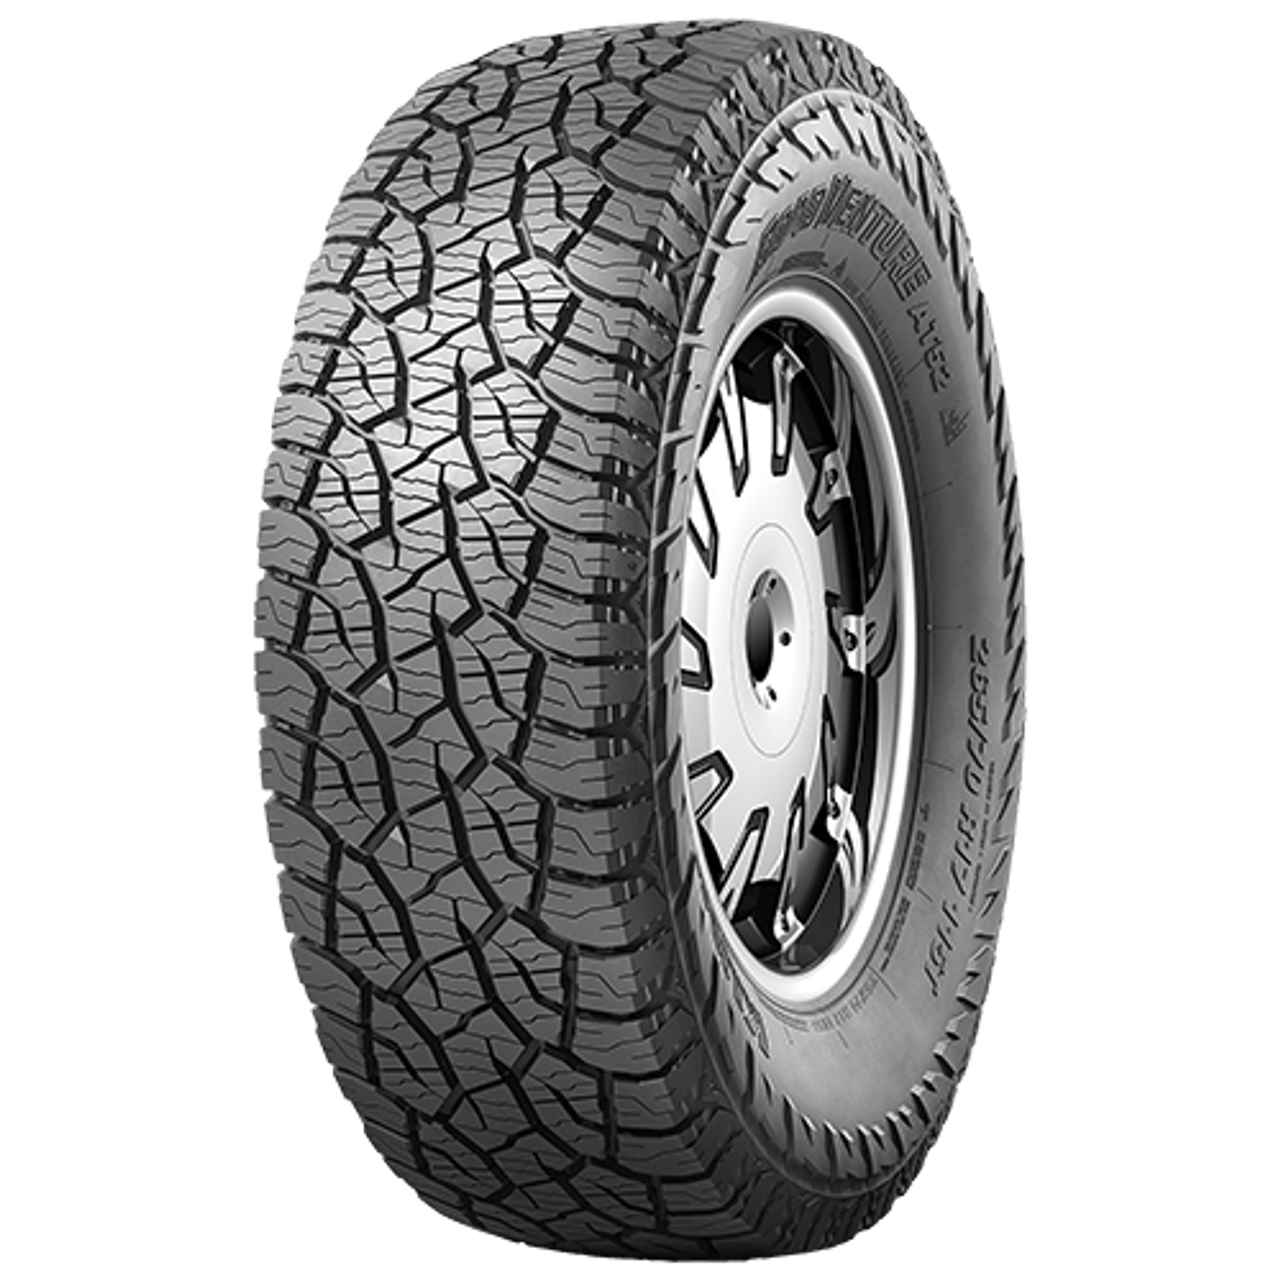 KUMHO ROAD VENTURE AT52 265/75R16 116T BSW